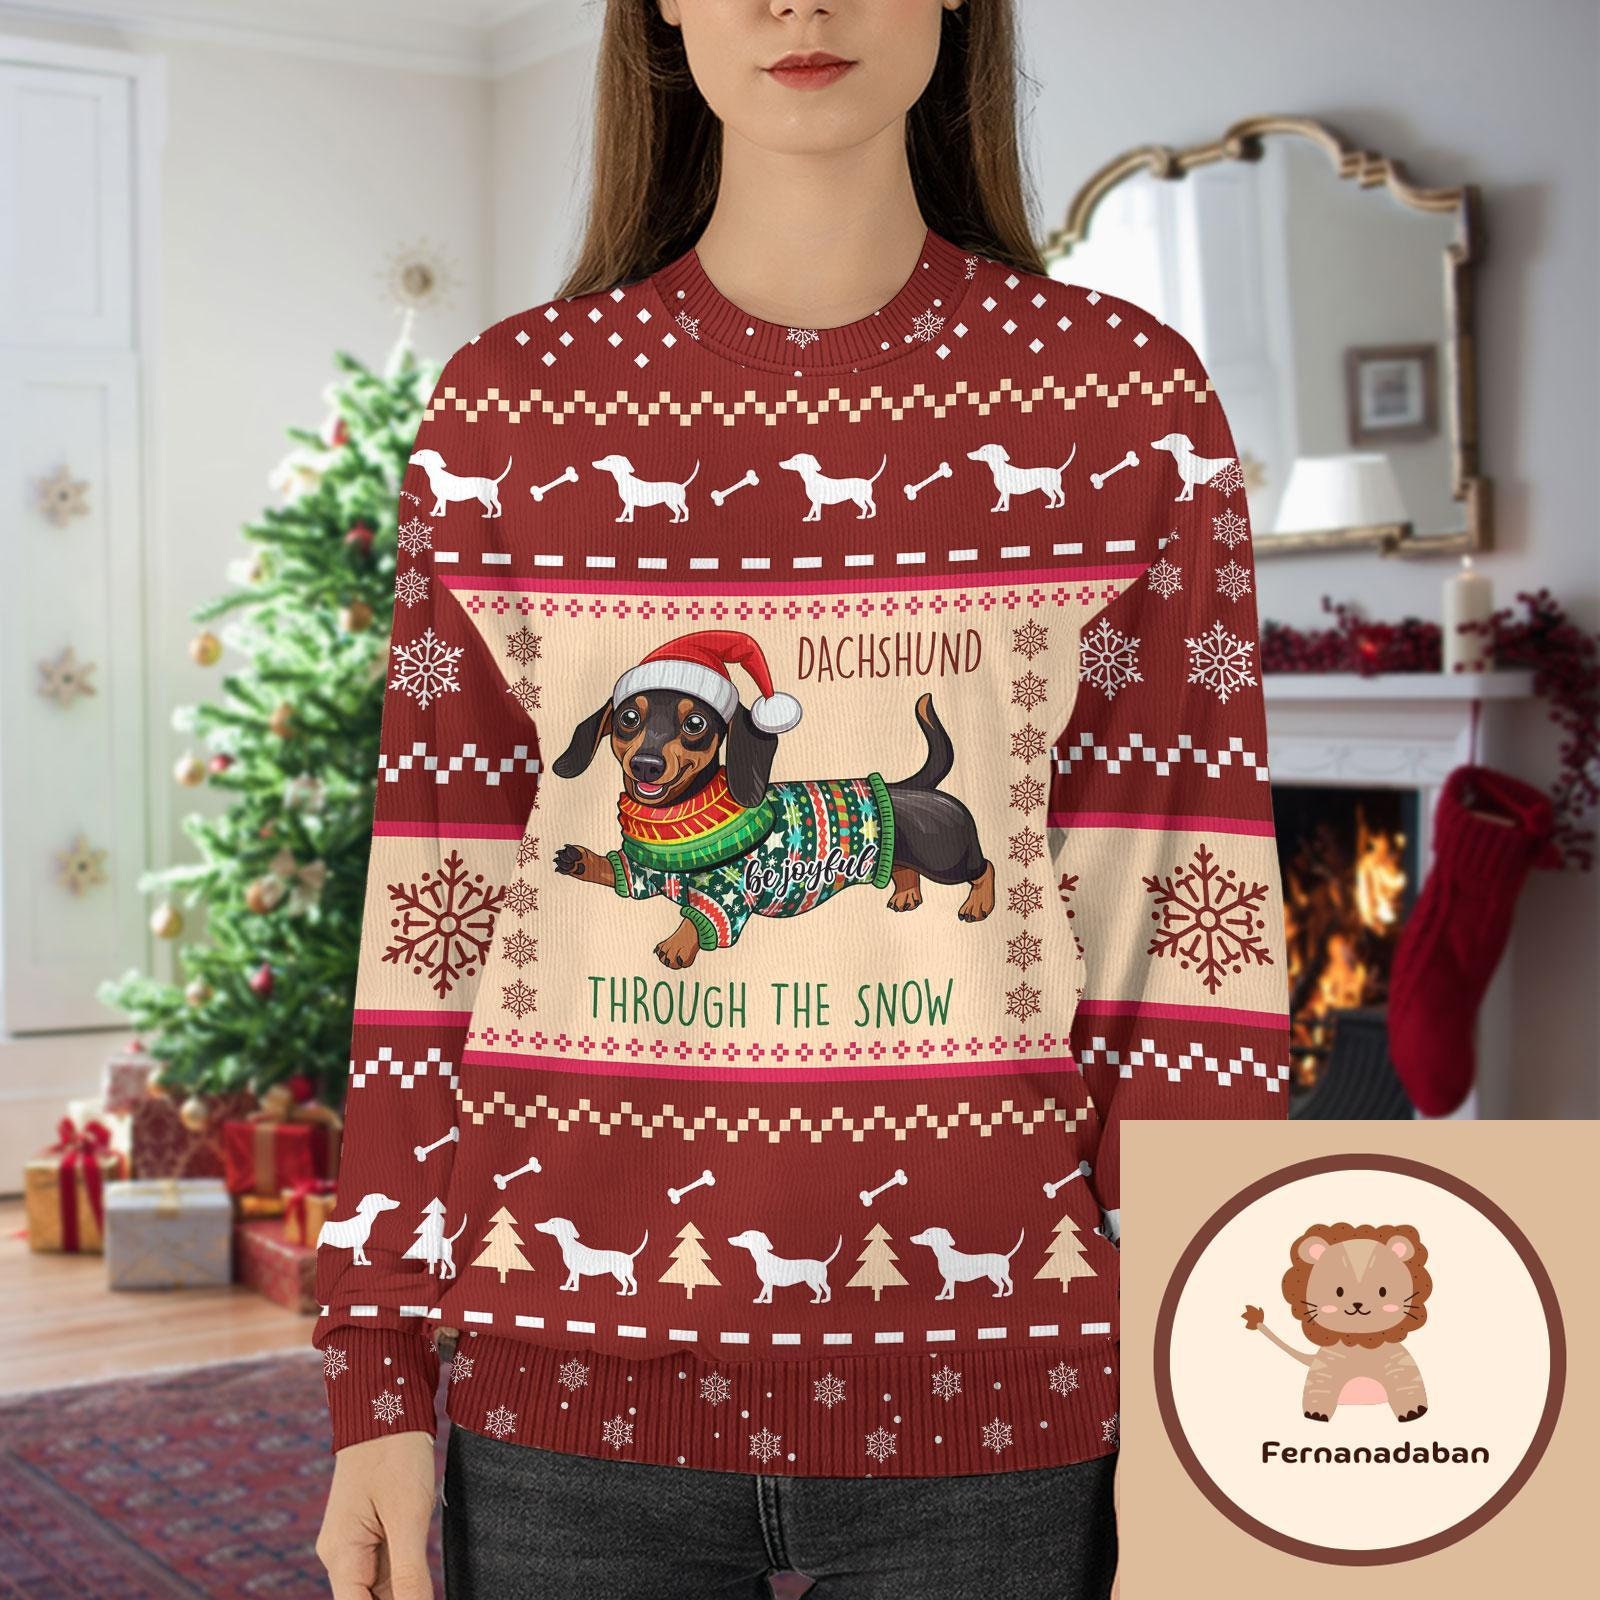 Discover Christmas Gift, Dachshund Ugly Sweater, Dachshund Sweater, Dachshund Christmas Sweater,Dachshund Ugly Christmas Sweater,Dachshund Shirt